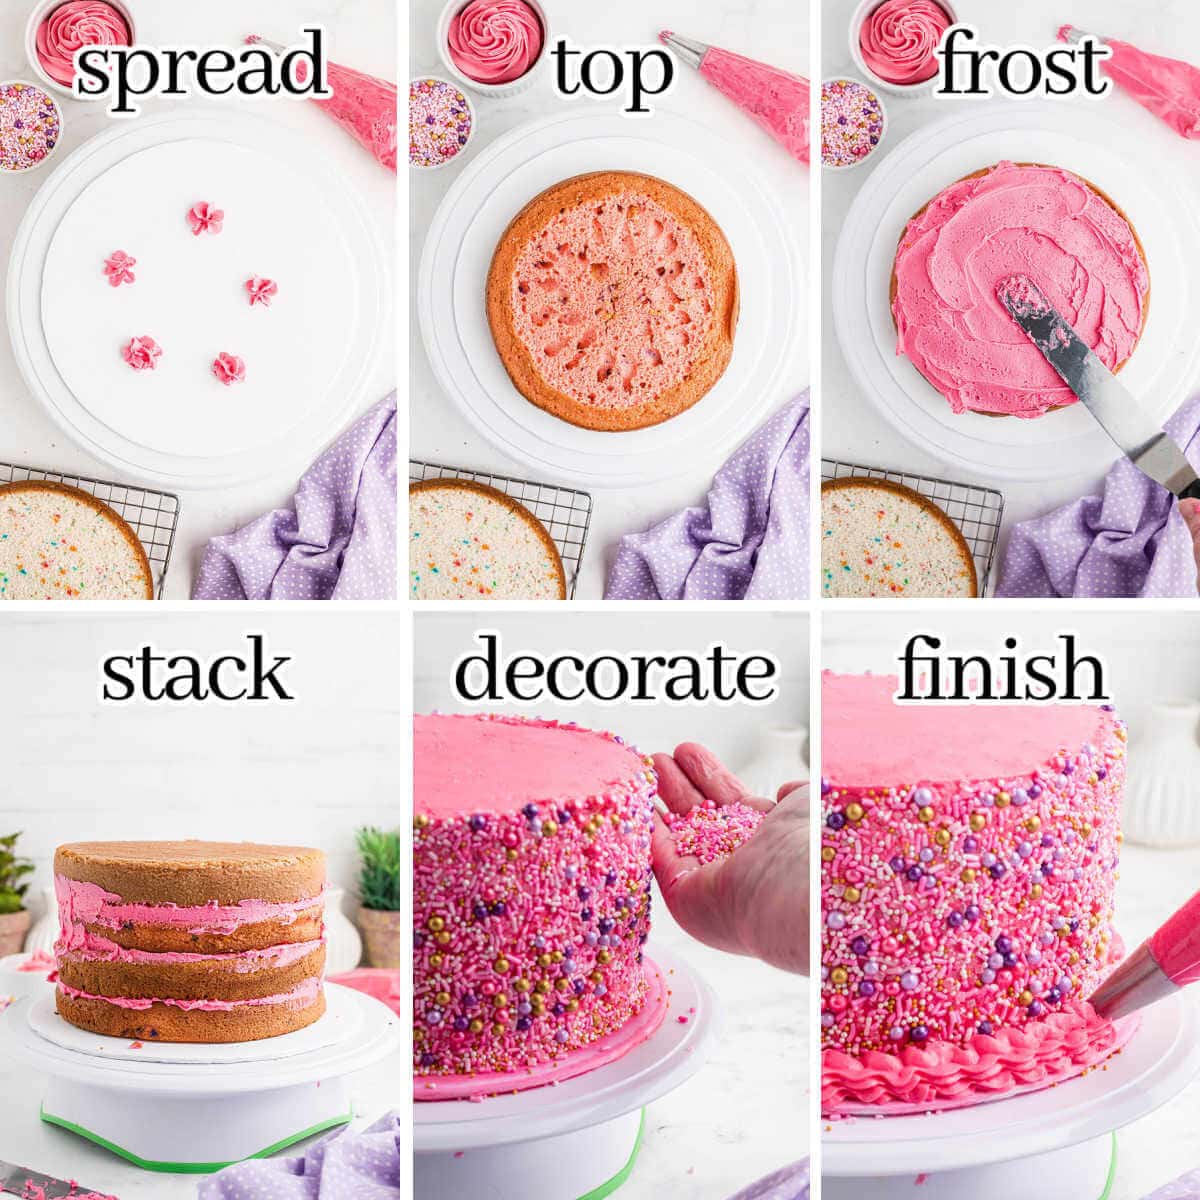 Step-by-step instructions on how to prepare and frost a layer cake. With print overlay.